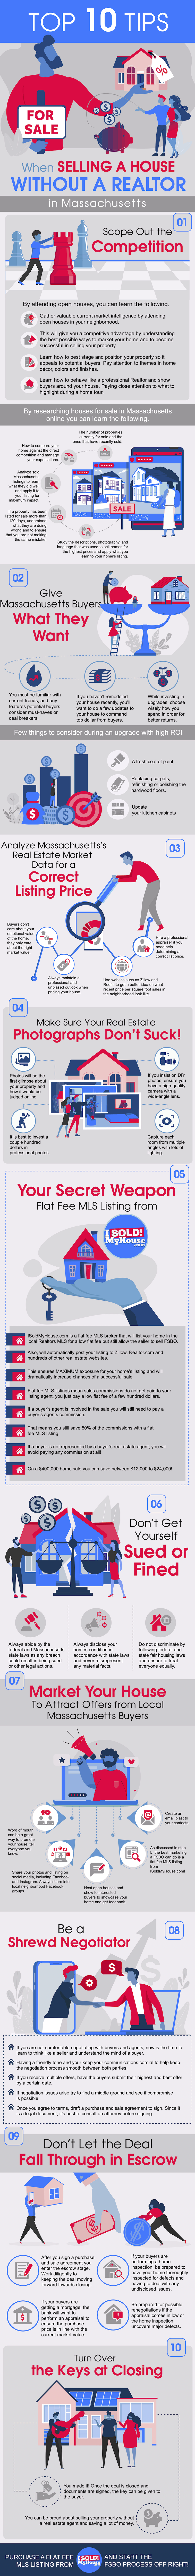 infographic of the 10 steps to sell a house in massachusetts without an agent